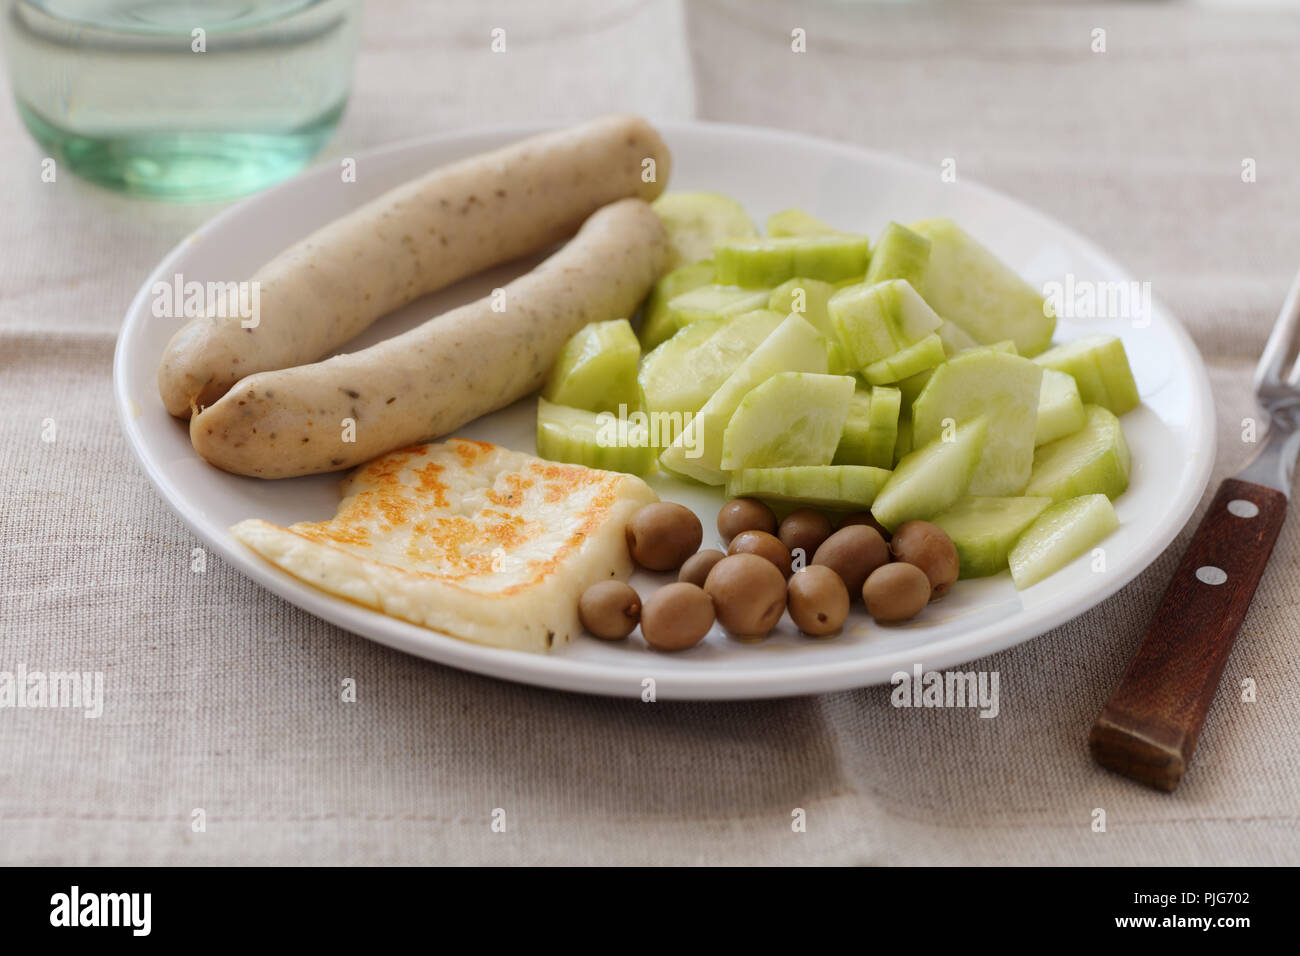 White sausages with roasted halloumi cheese, cucumbers, and olives Stock Photo